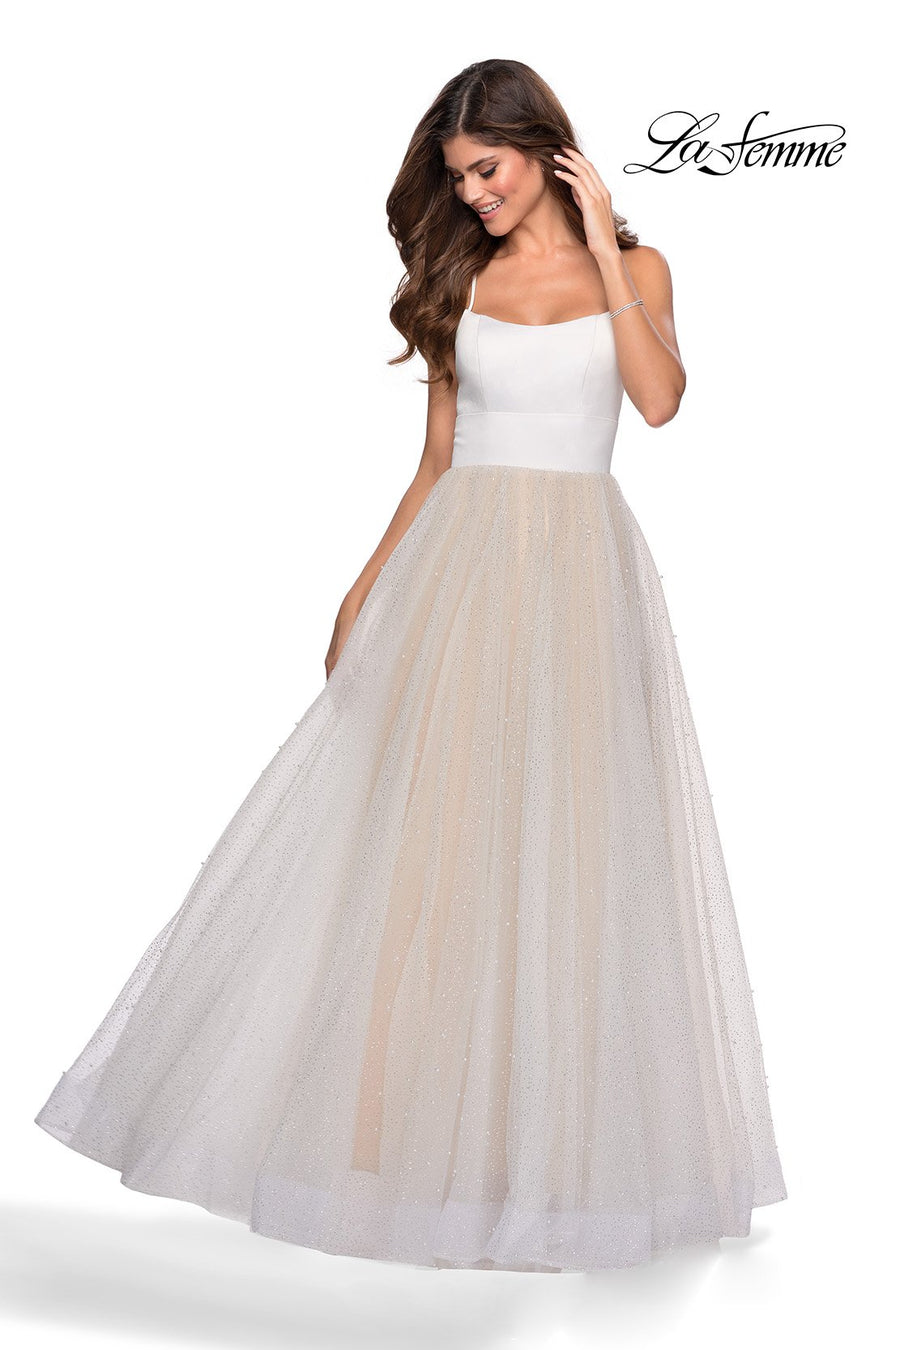 La Femme 28764 prom dress images.  La Femme 28764 is available in these colors: White.